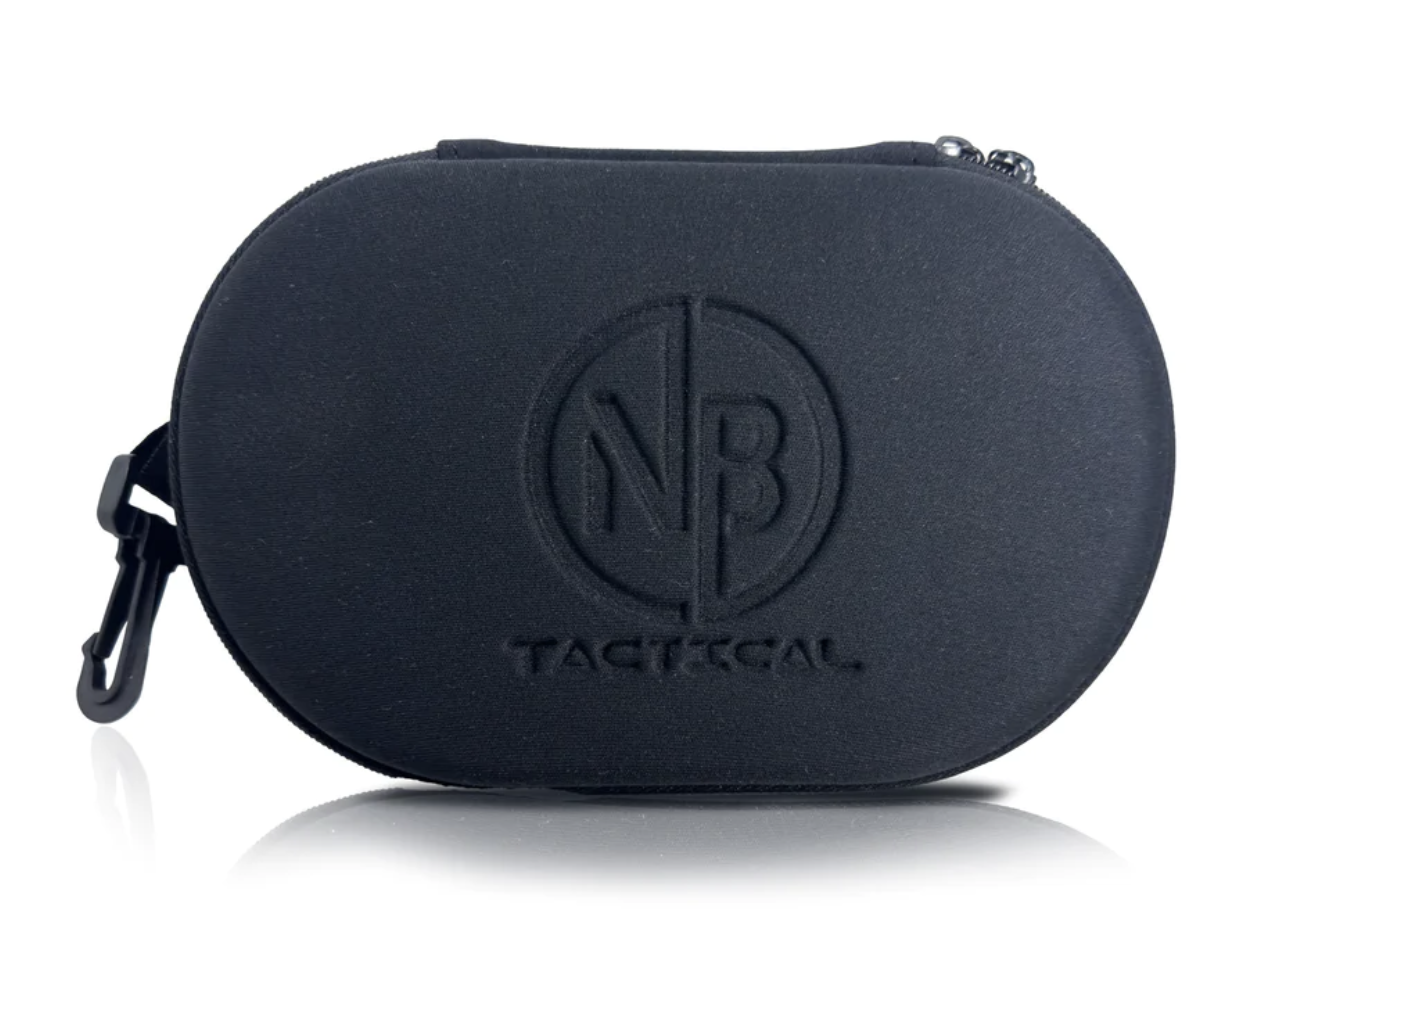 NB-Tactical GHOST MASK - CASE